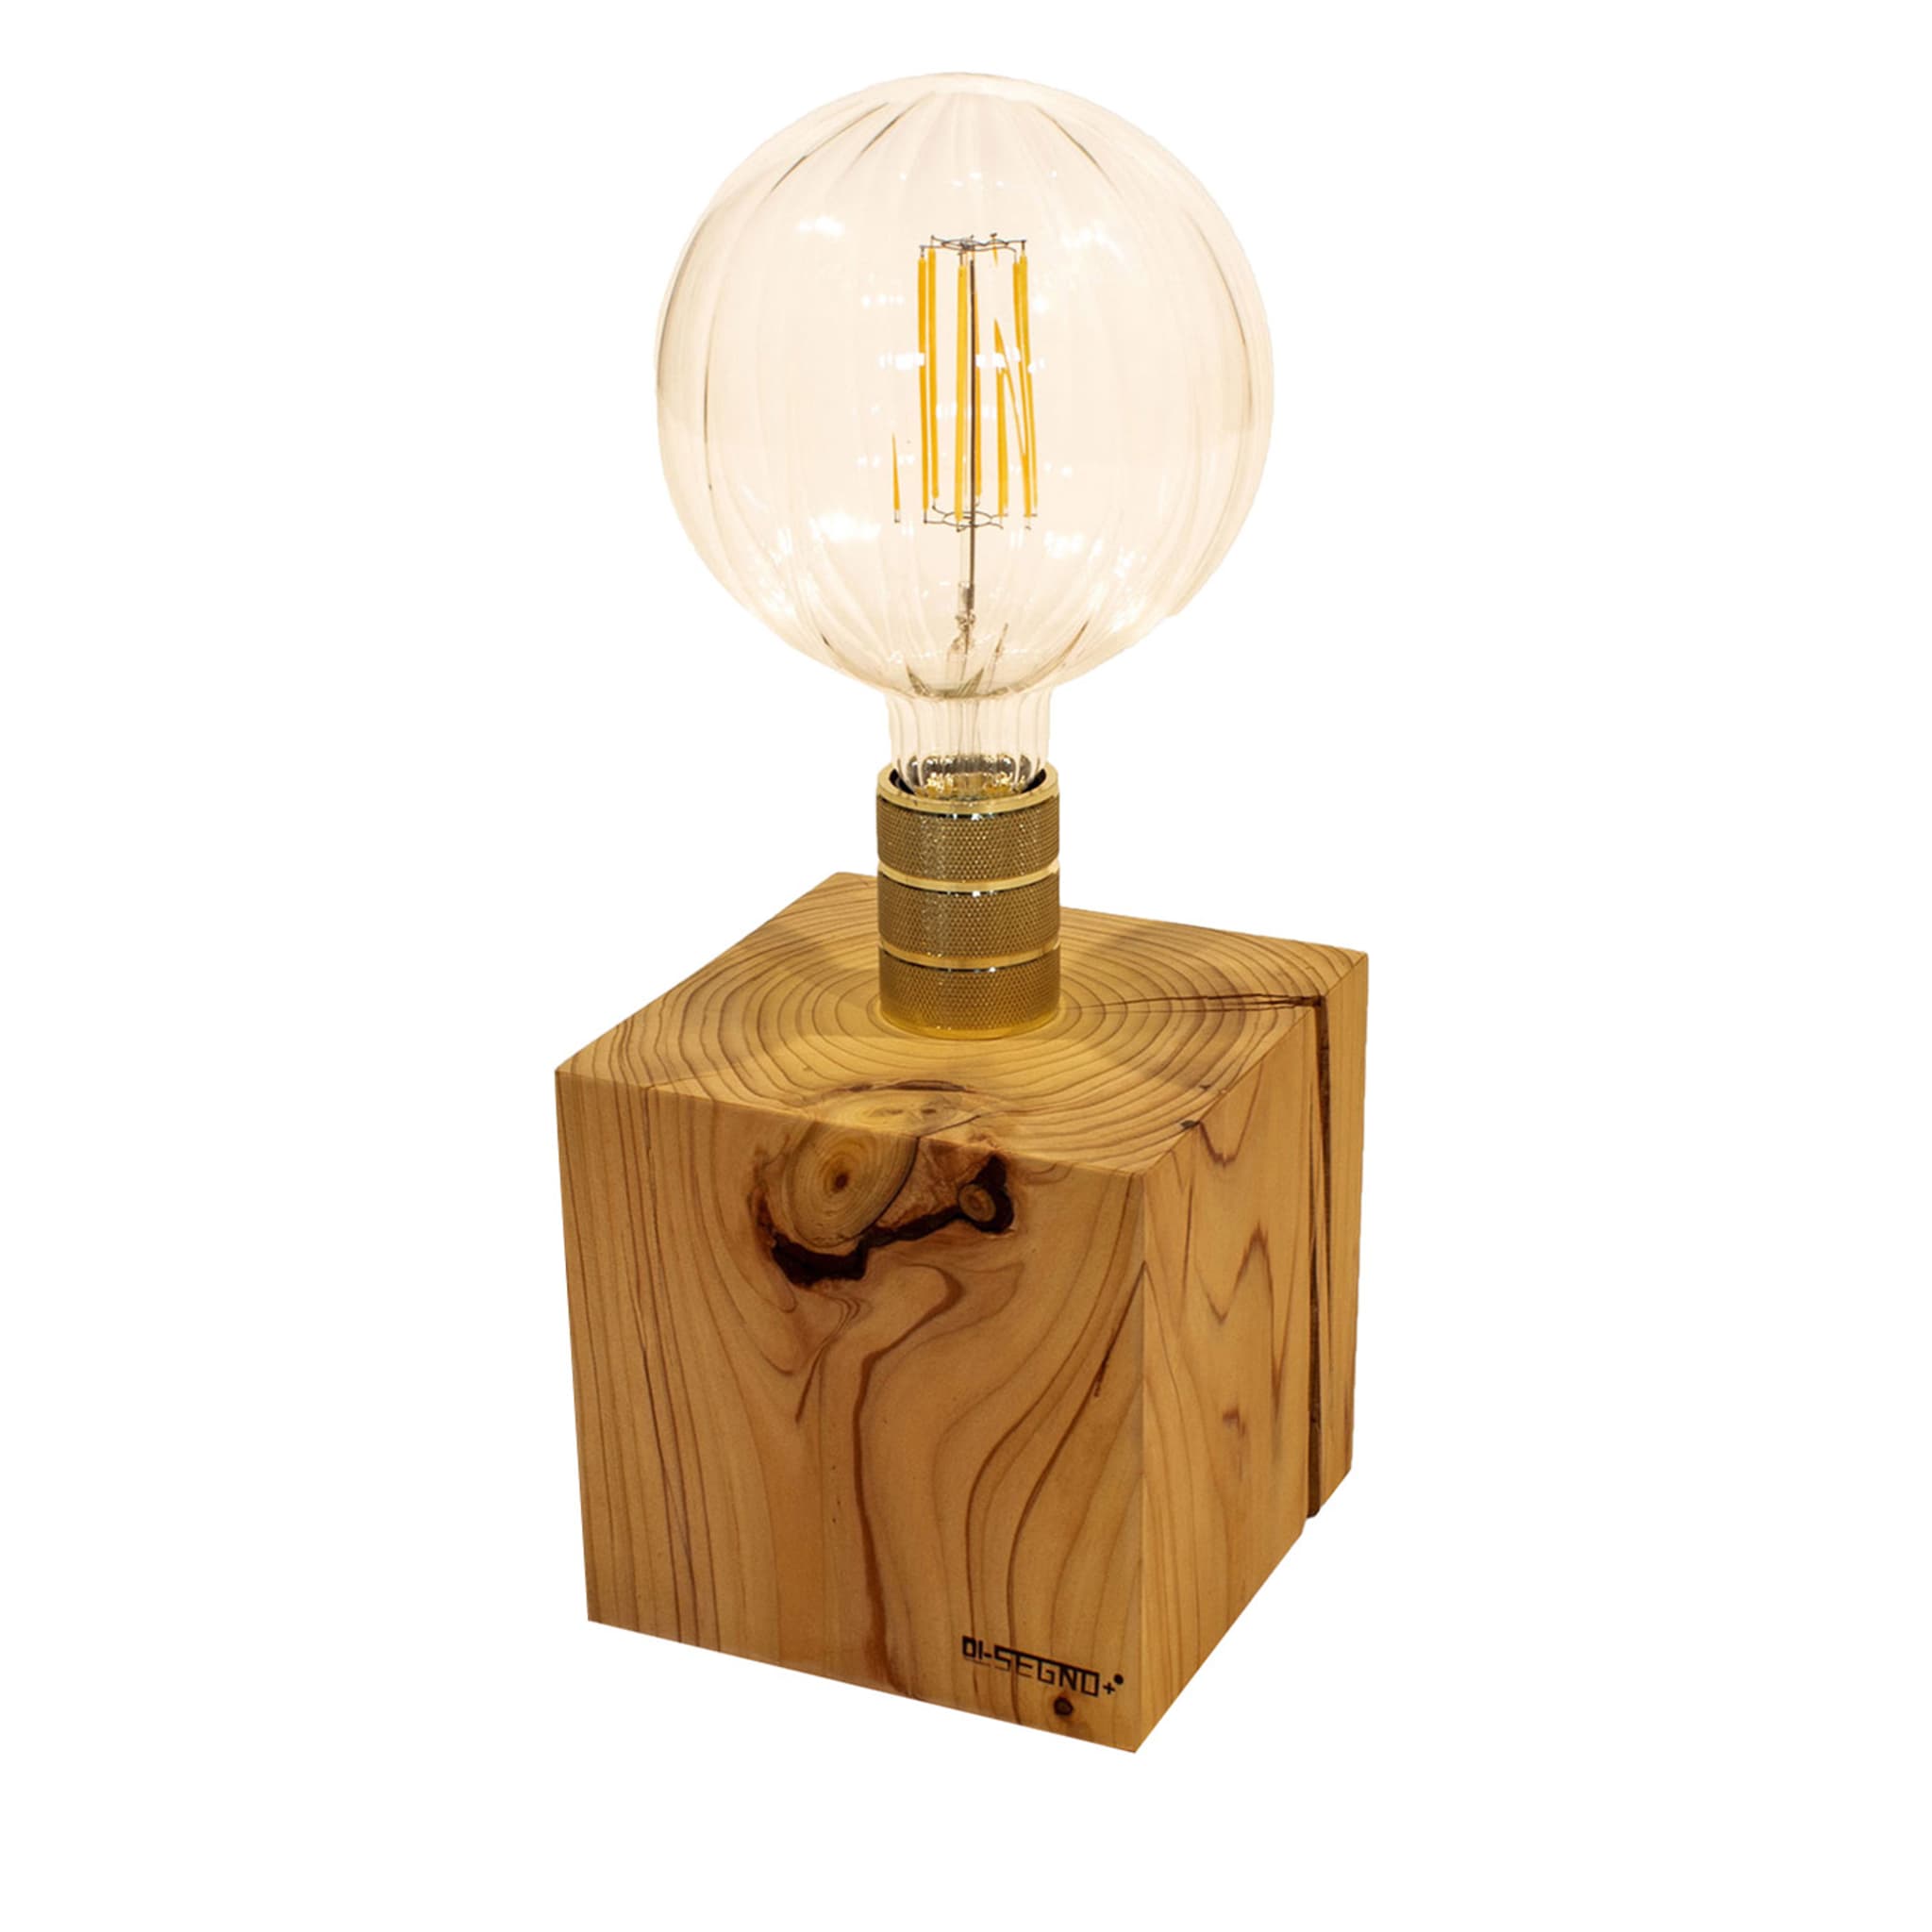 Lume Candida Cube Table Lamp #1 - Main view